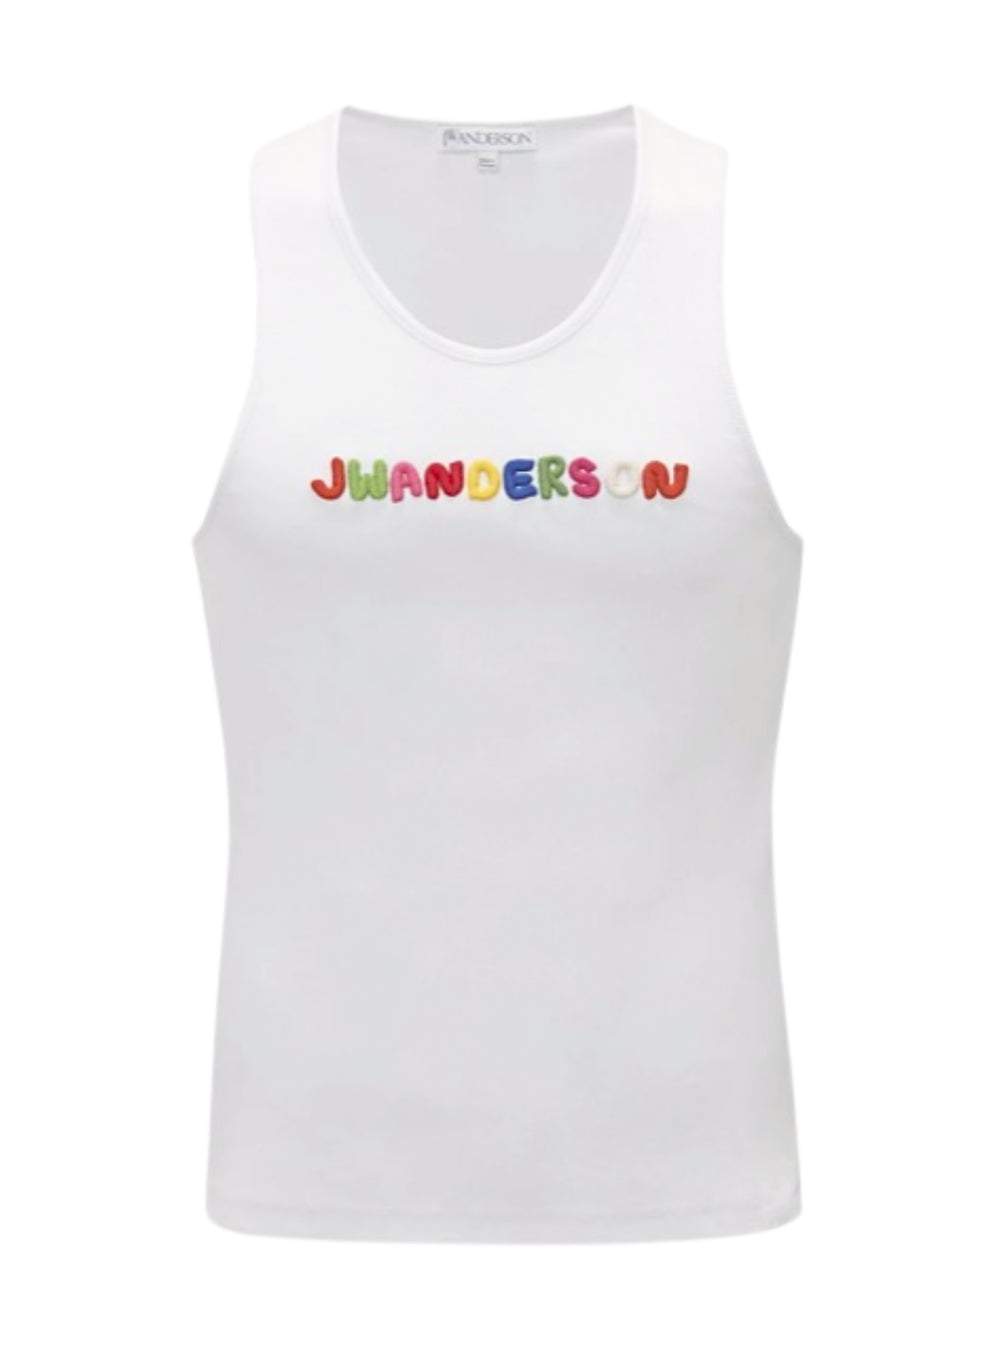 J.W. ANDERSON | Logo Embroidered Tank